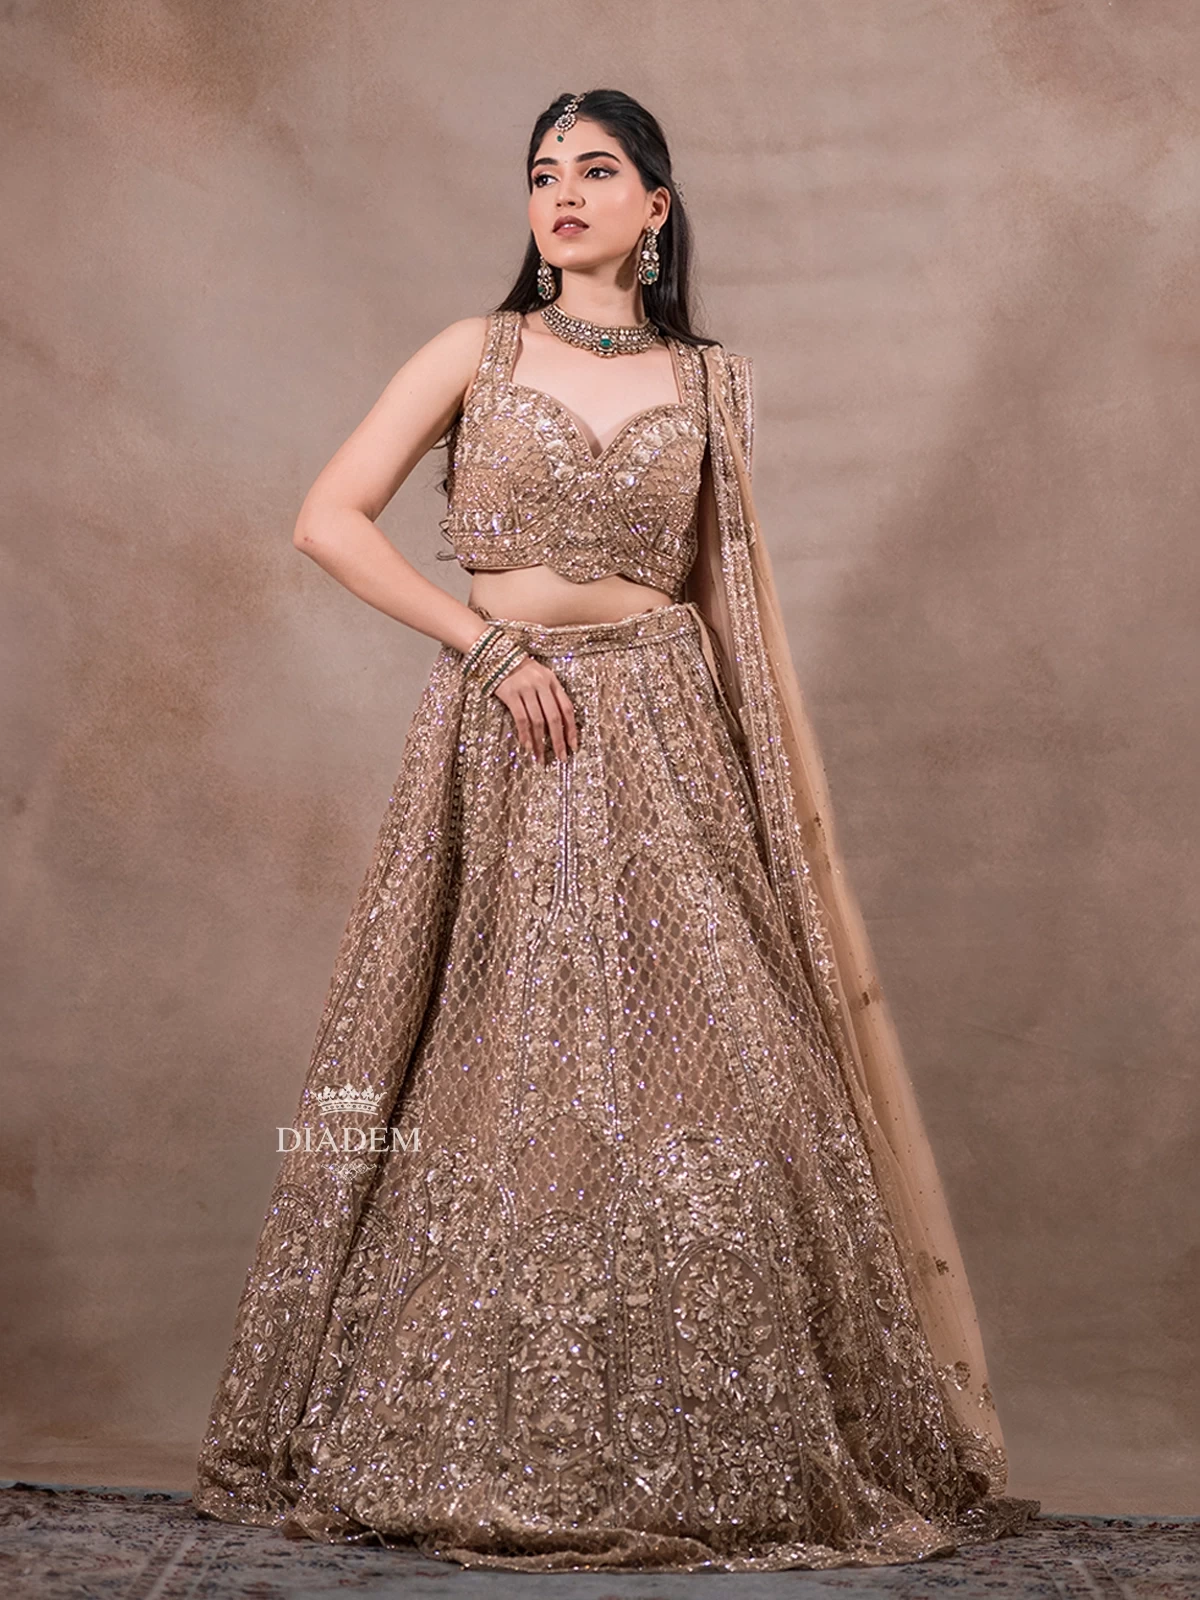 Beige Net Lehenga Embellished With Stone Work And Sequins, Paired With Dupatta